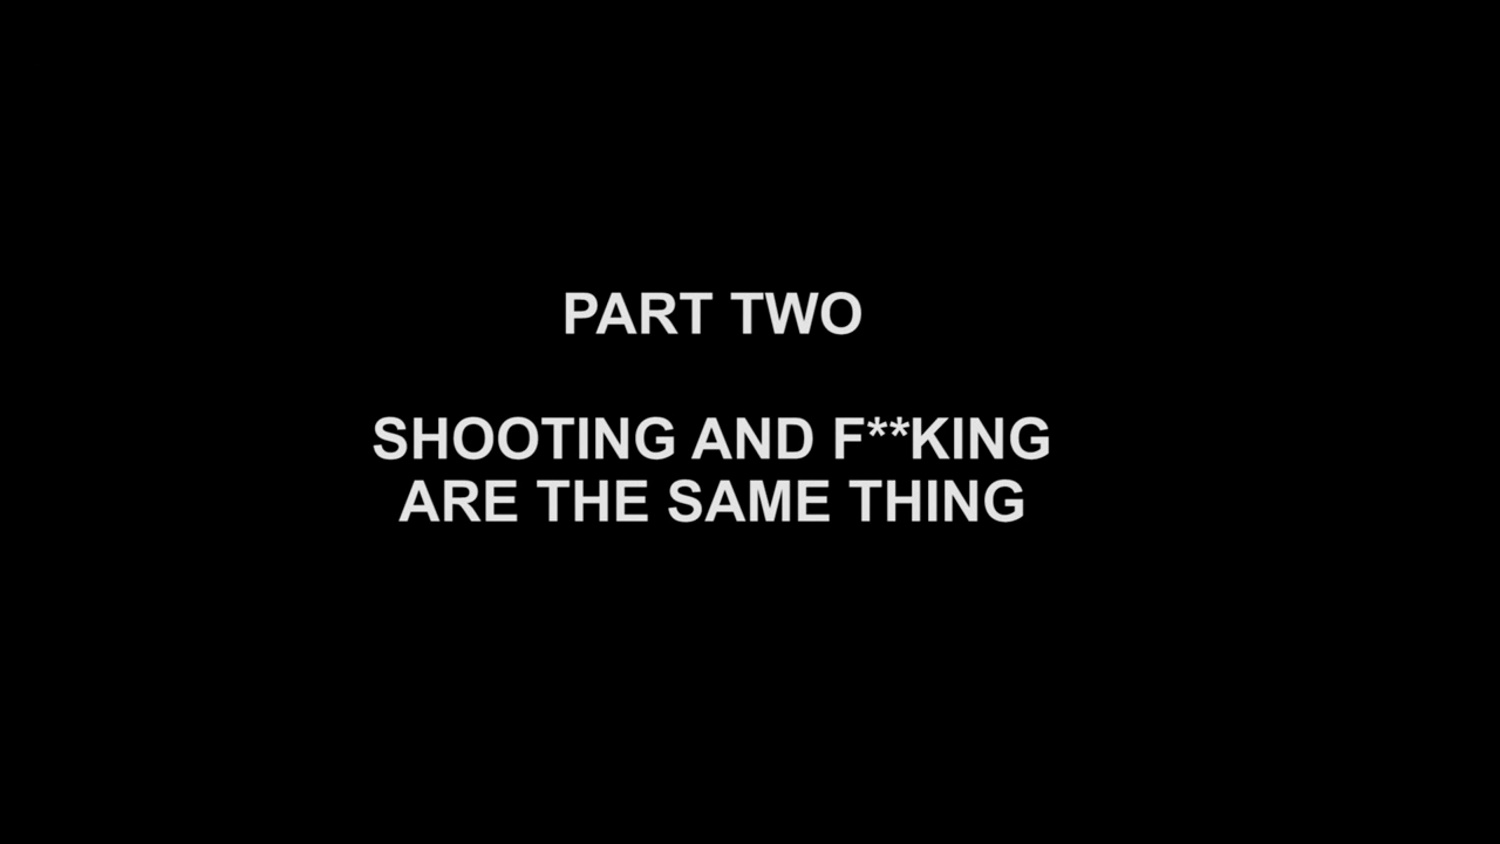 Can't Get You Out of My Head: Shooting and F**king Are the Same Thing | Season 1 | Episode 2